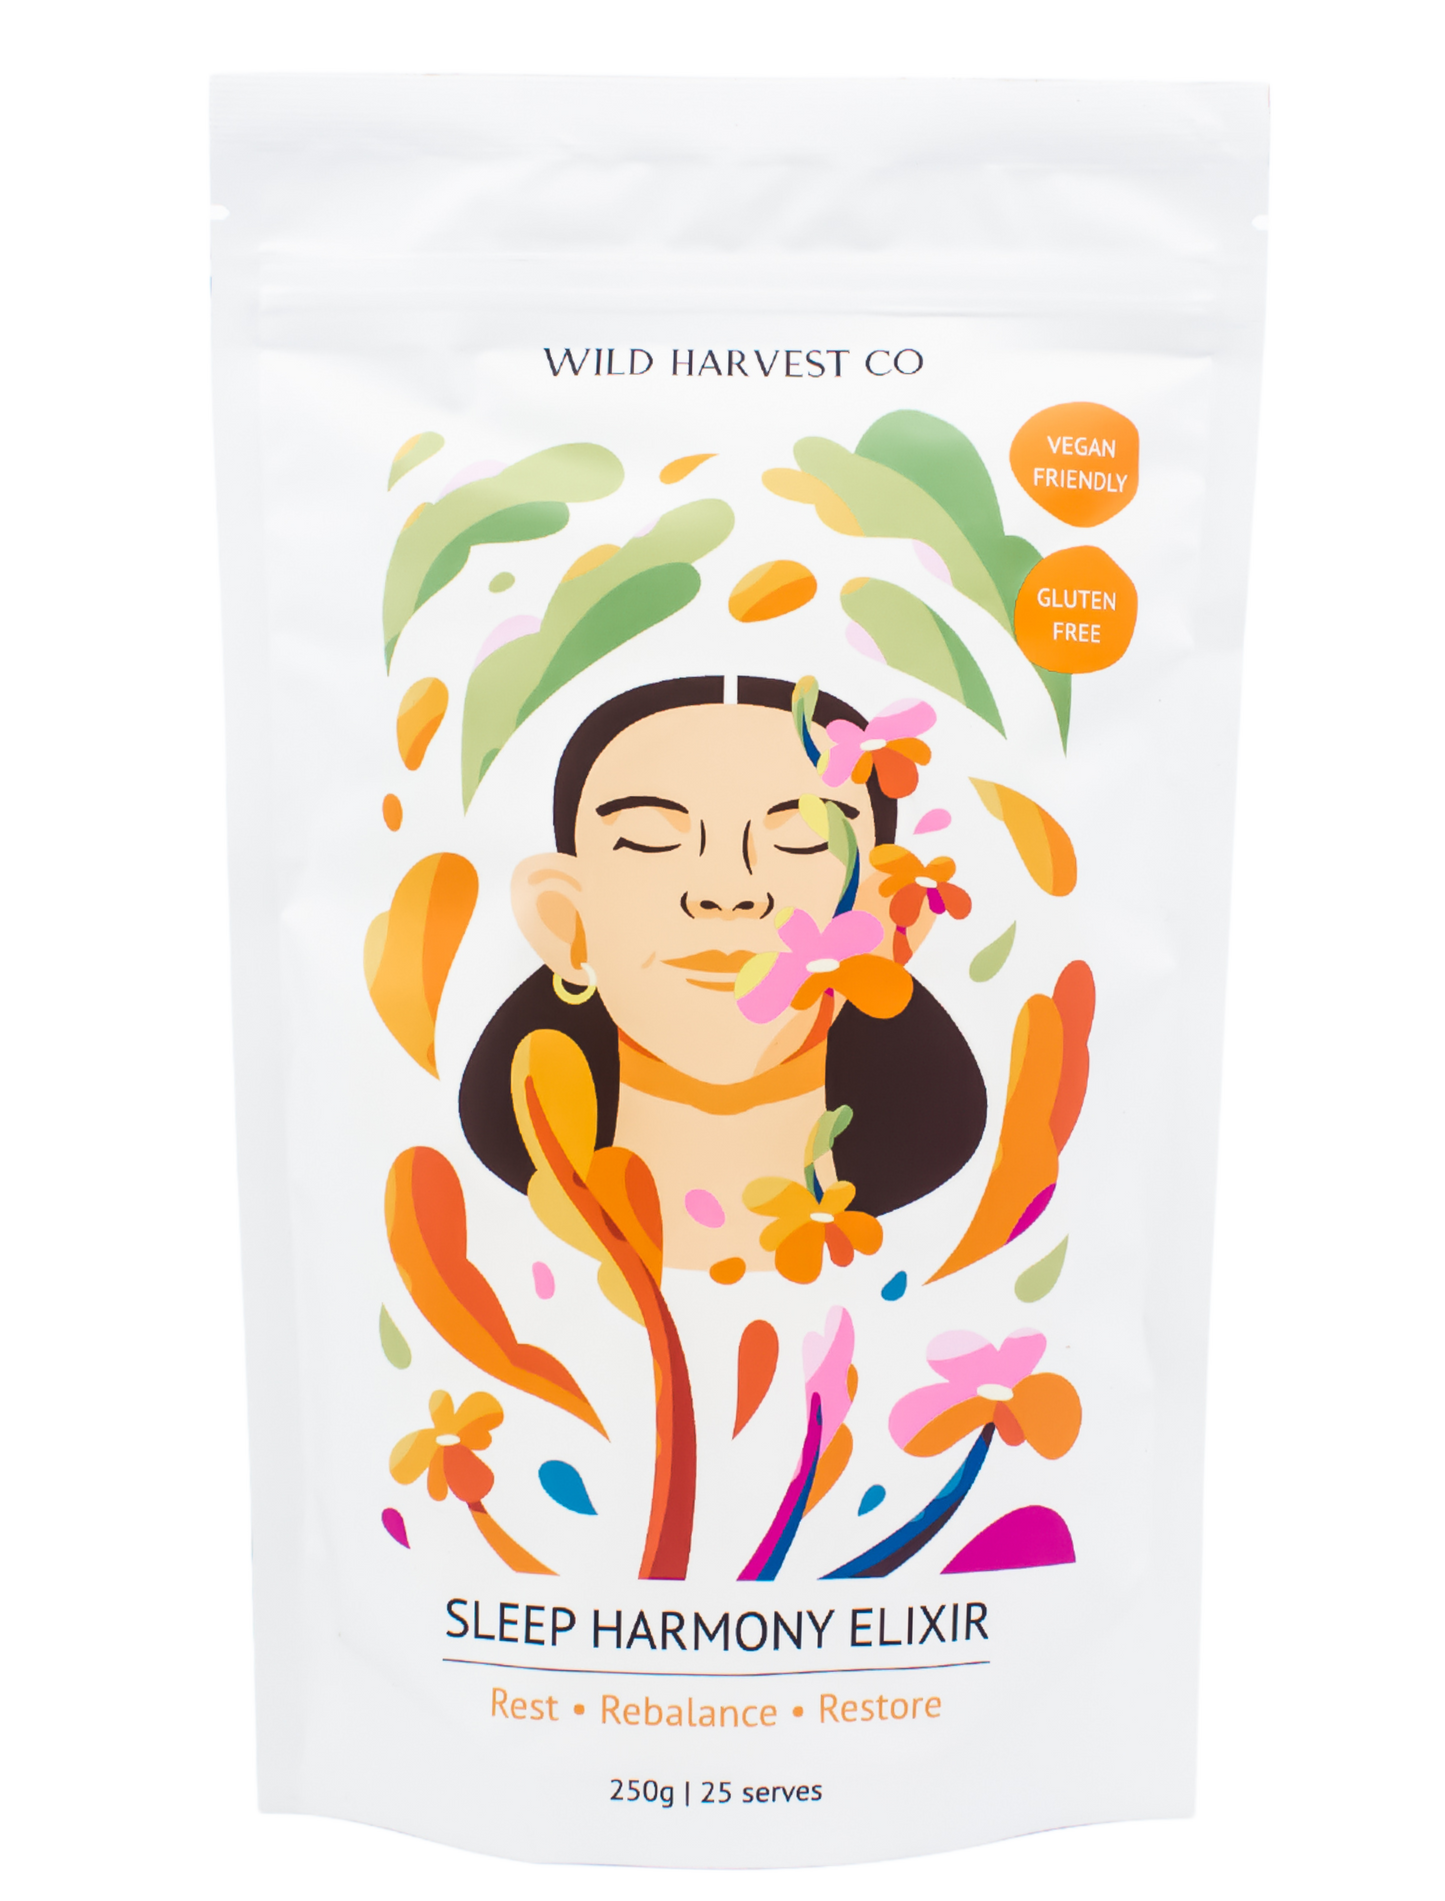 Wild Harvest Co Sleep Harmony Elixir Pouch with the illustration of a woman's face with closed eyes and flowers around her